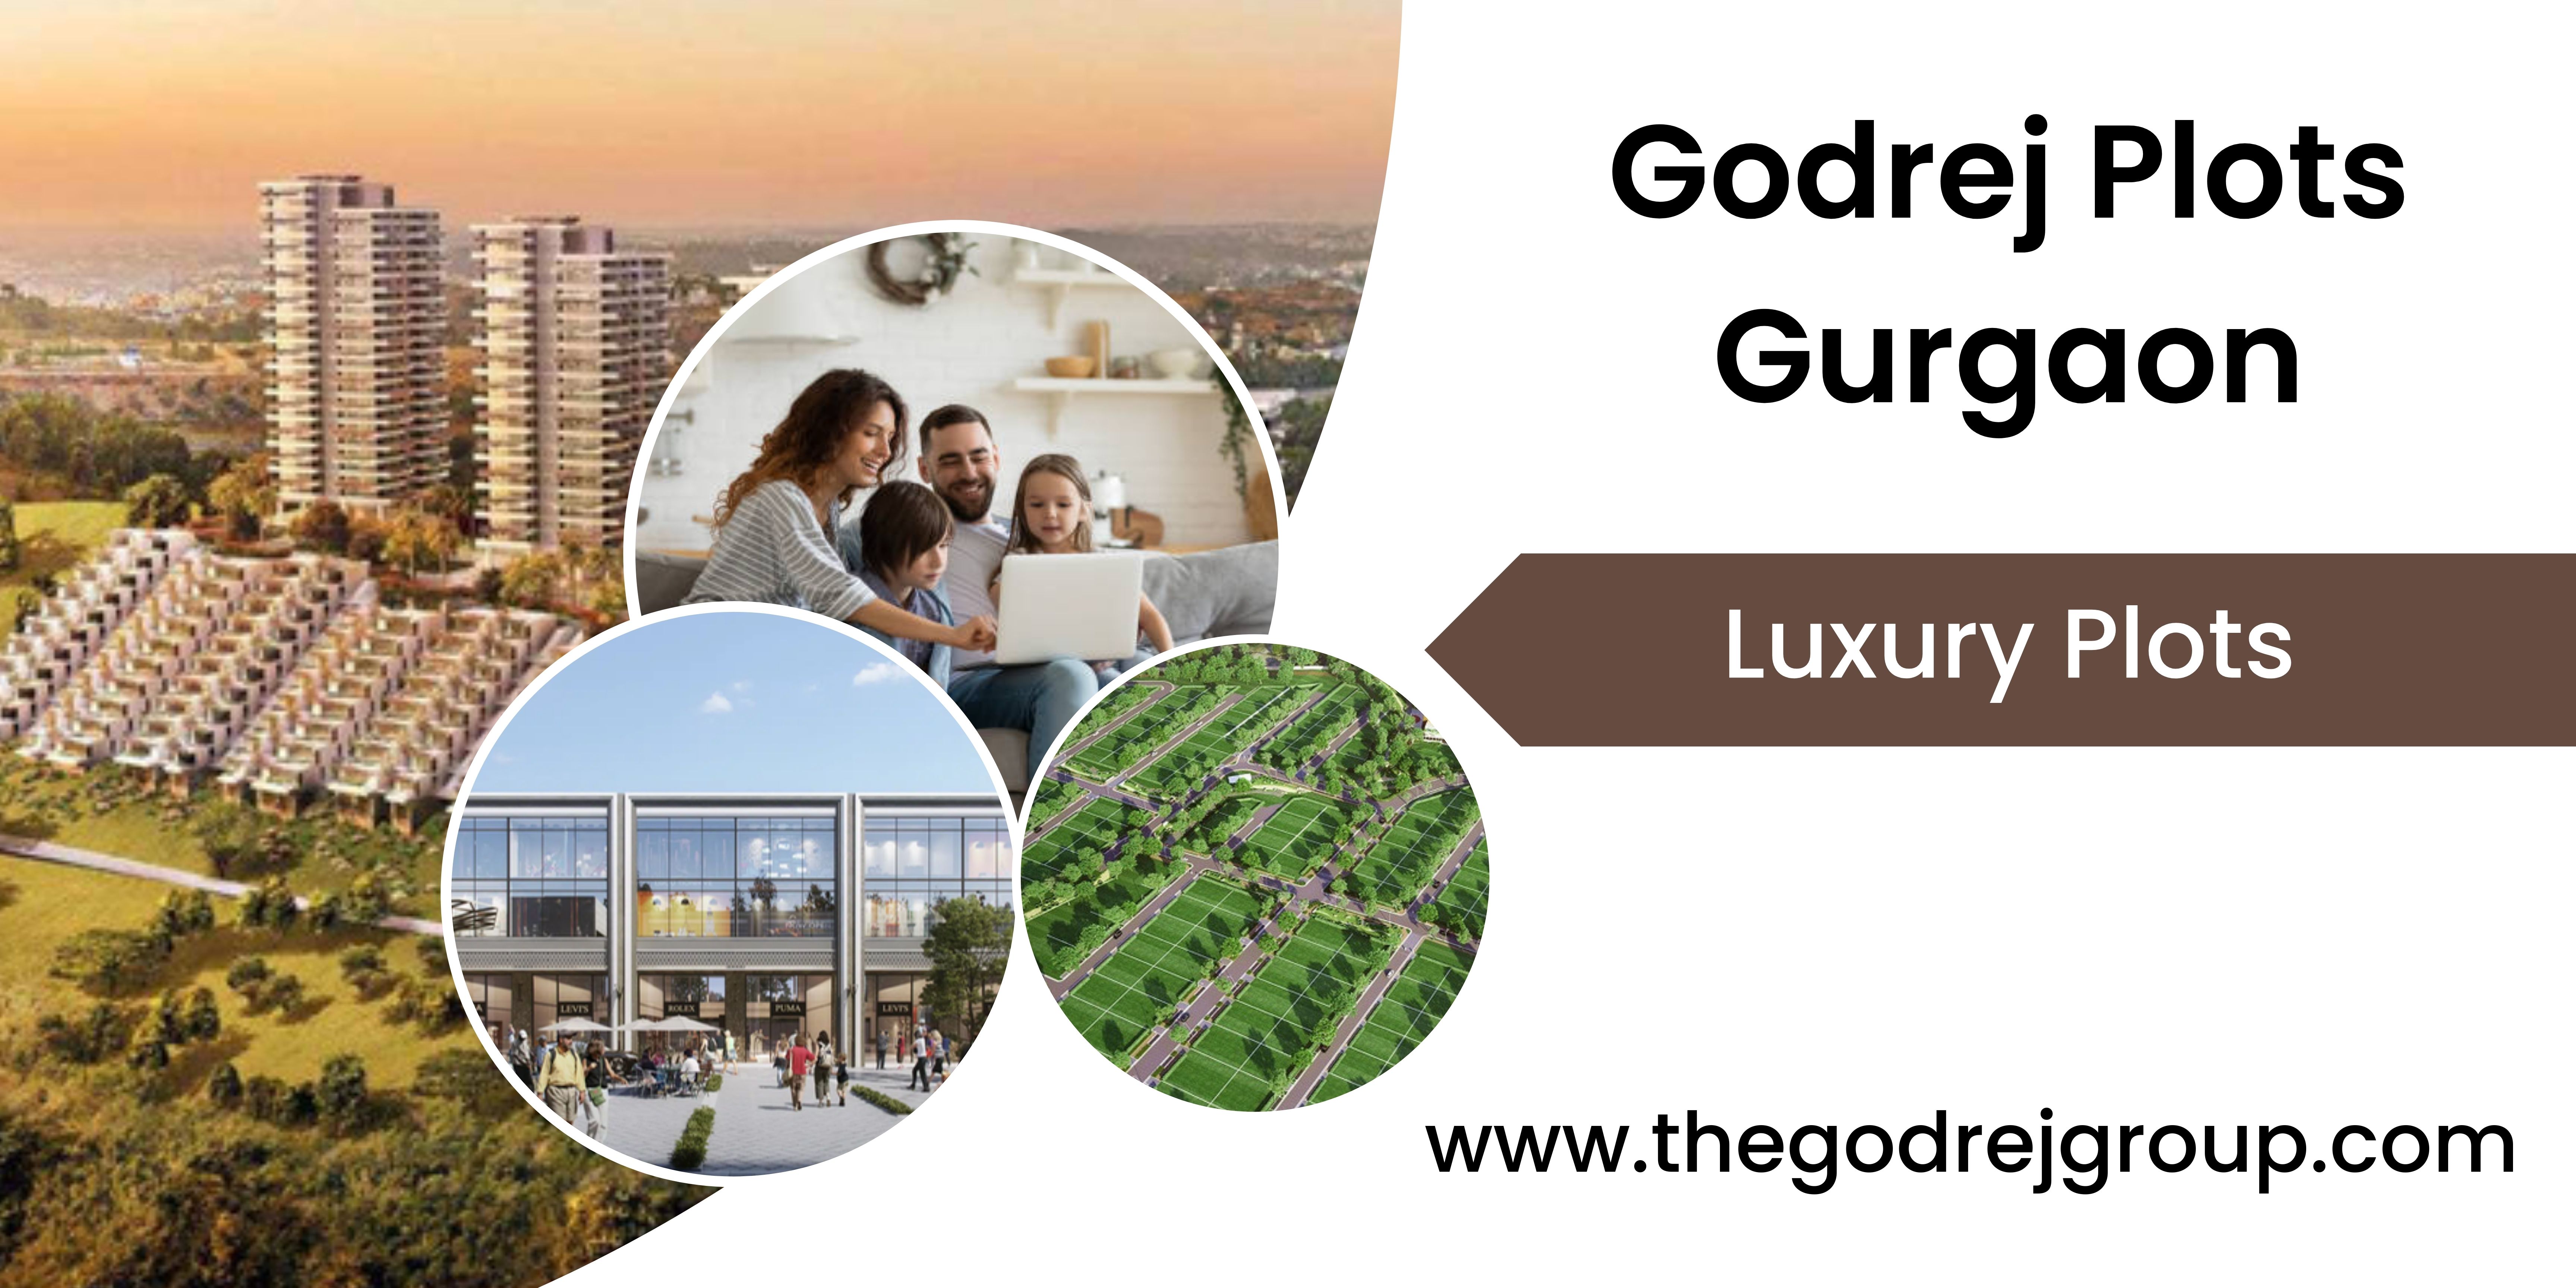 Godrej Plots Gurgaon - One Destination With Multiple Connections